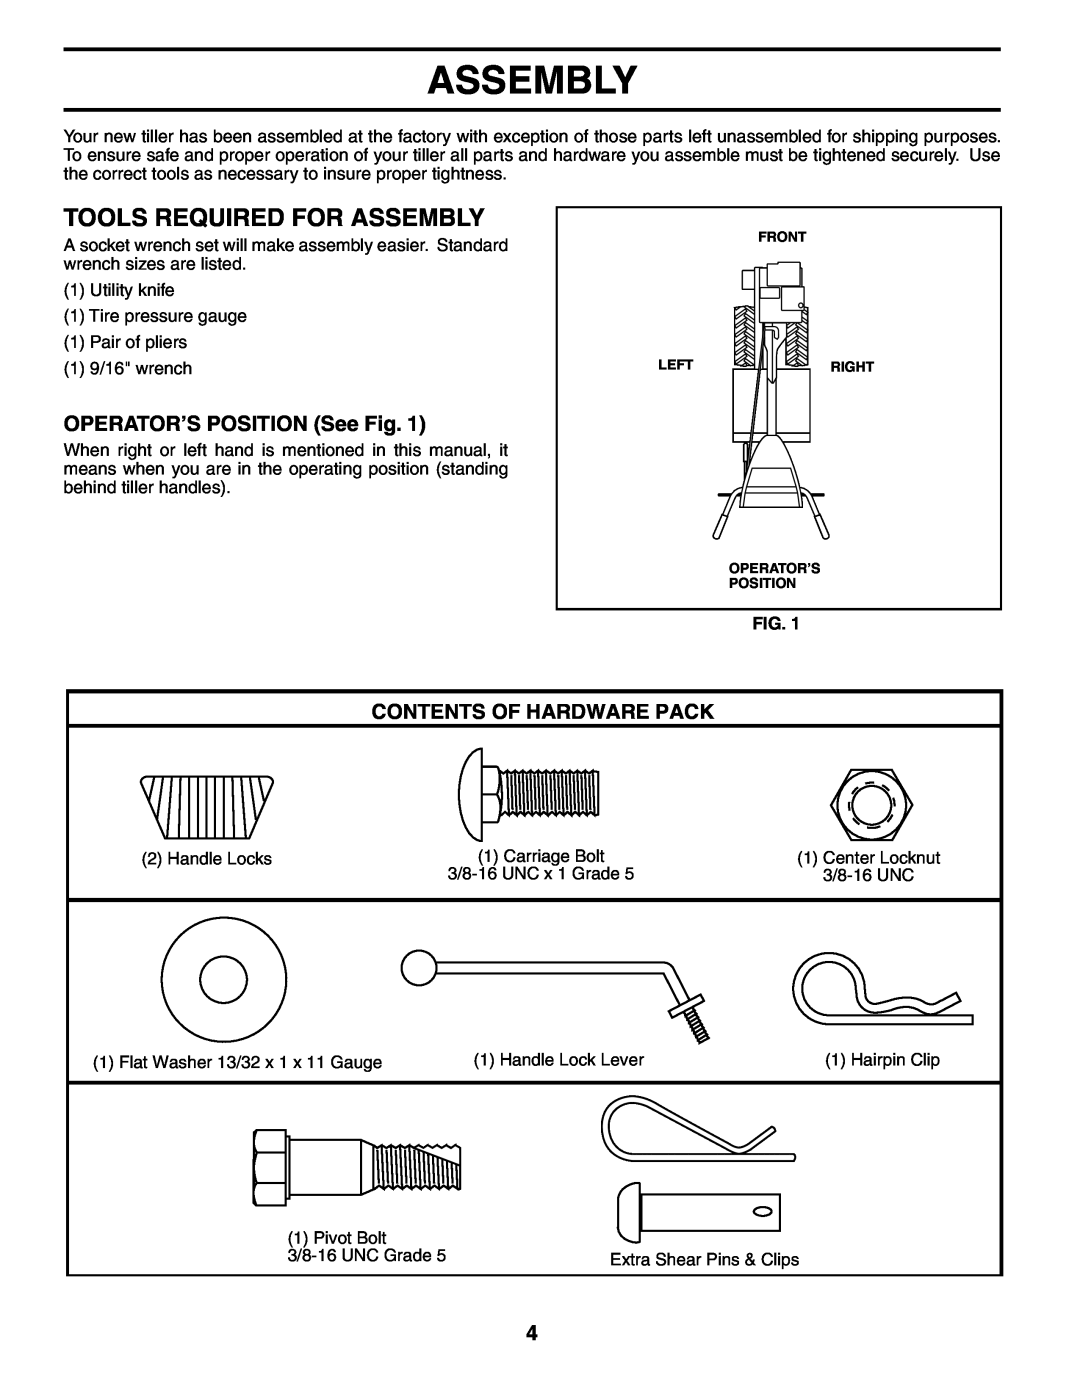 Poulan 184865 owner manual Tools Required For Assembly, OPERATOR’S POSITION See Fig, Contents Of Hardware Pack 